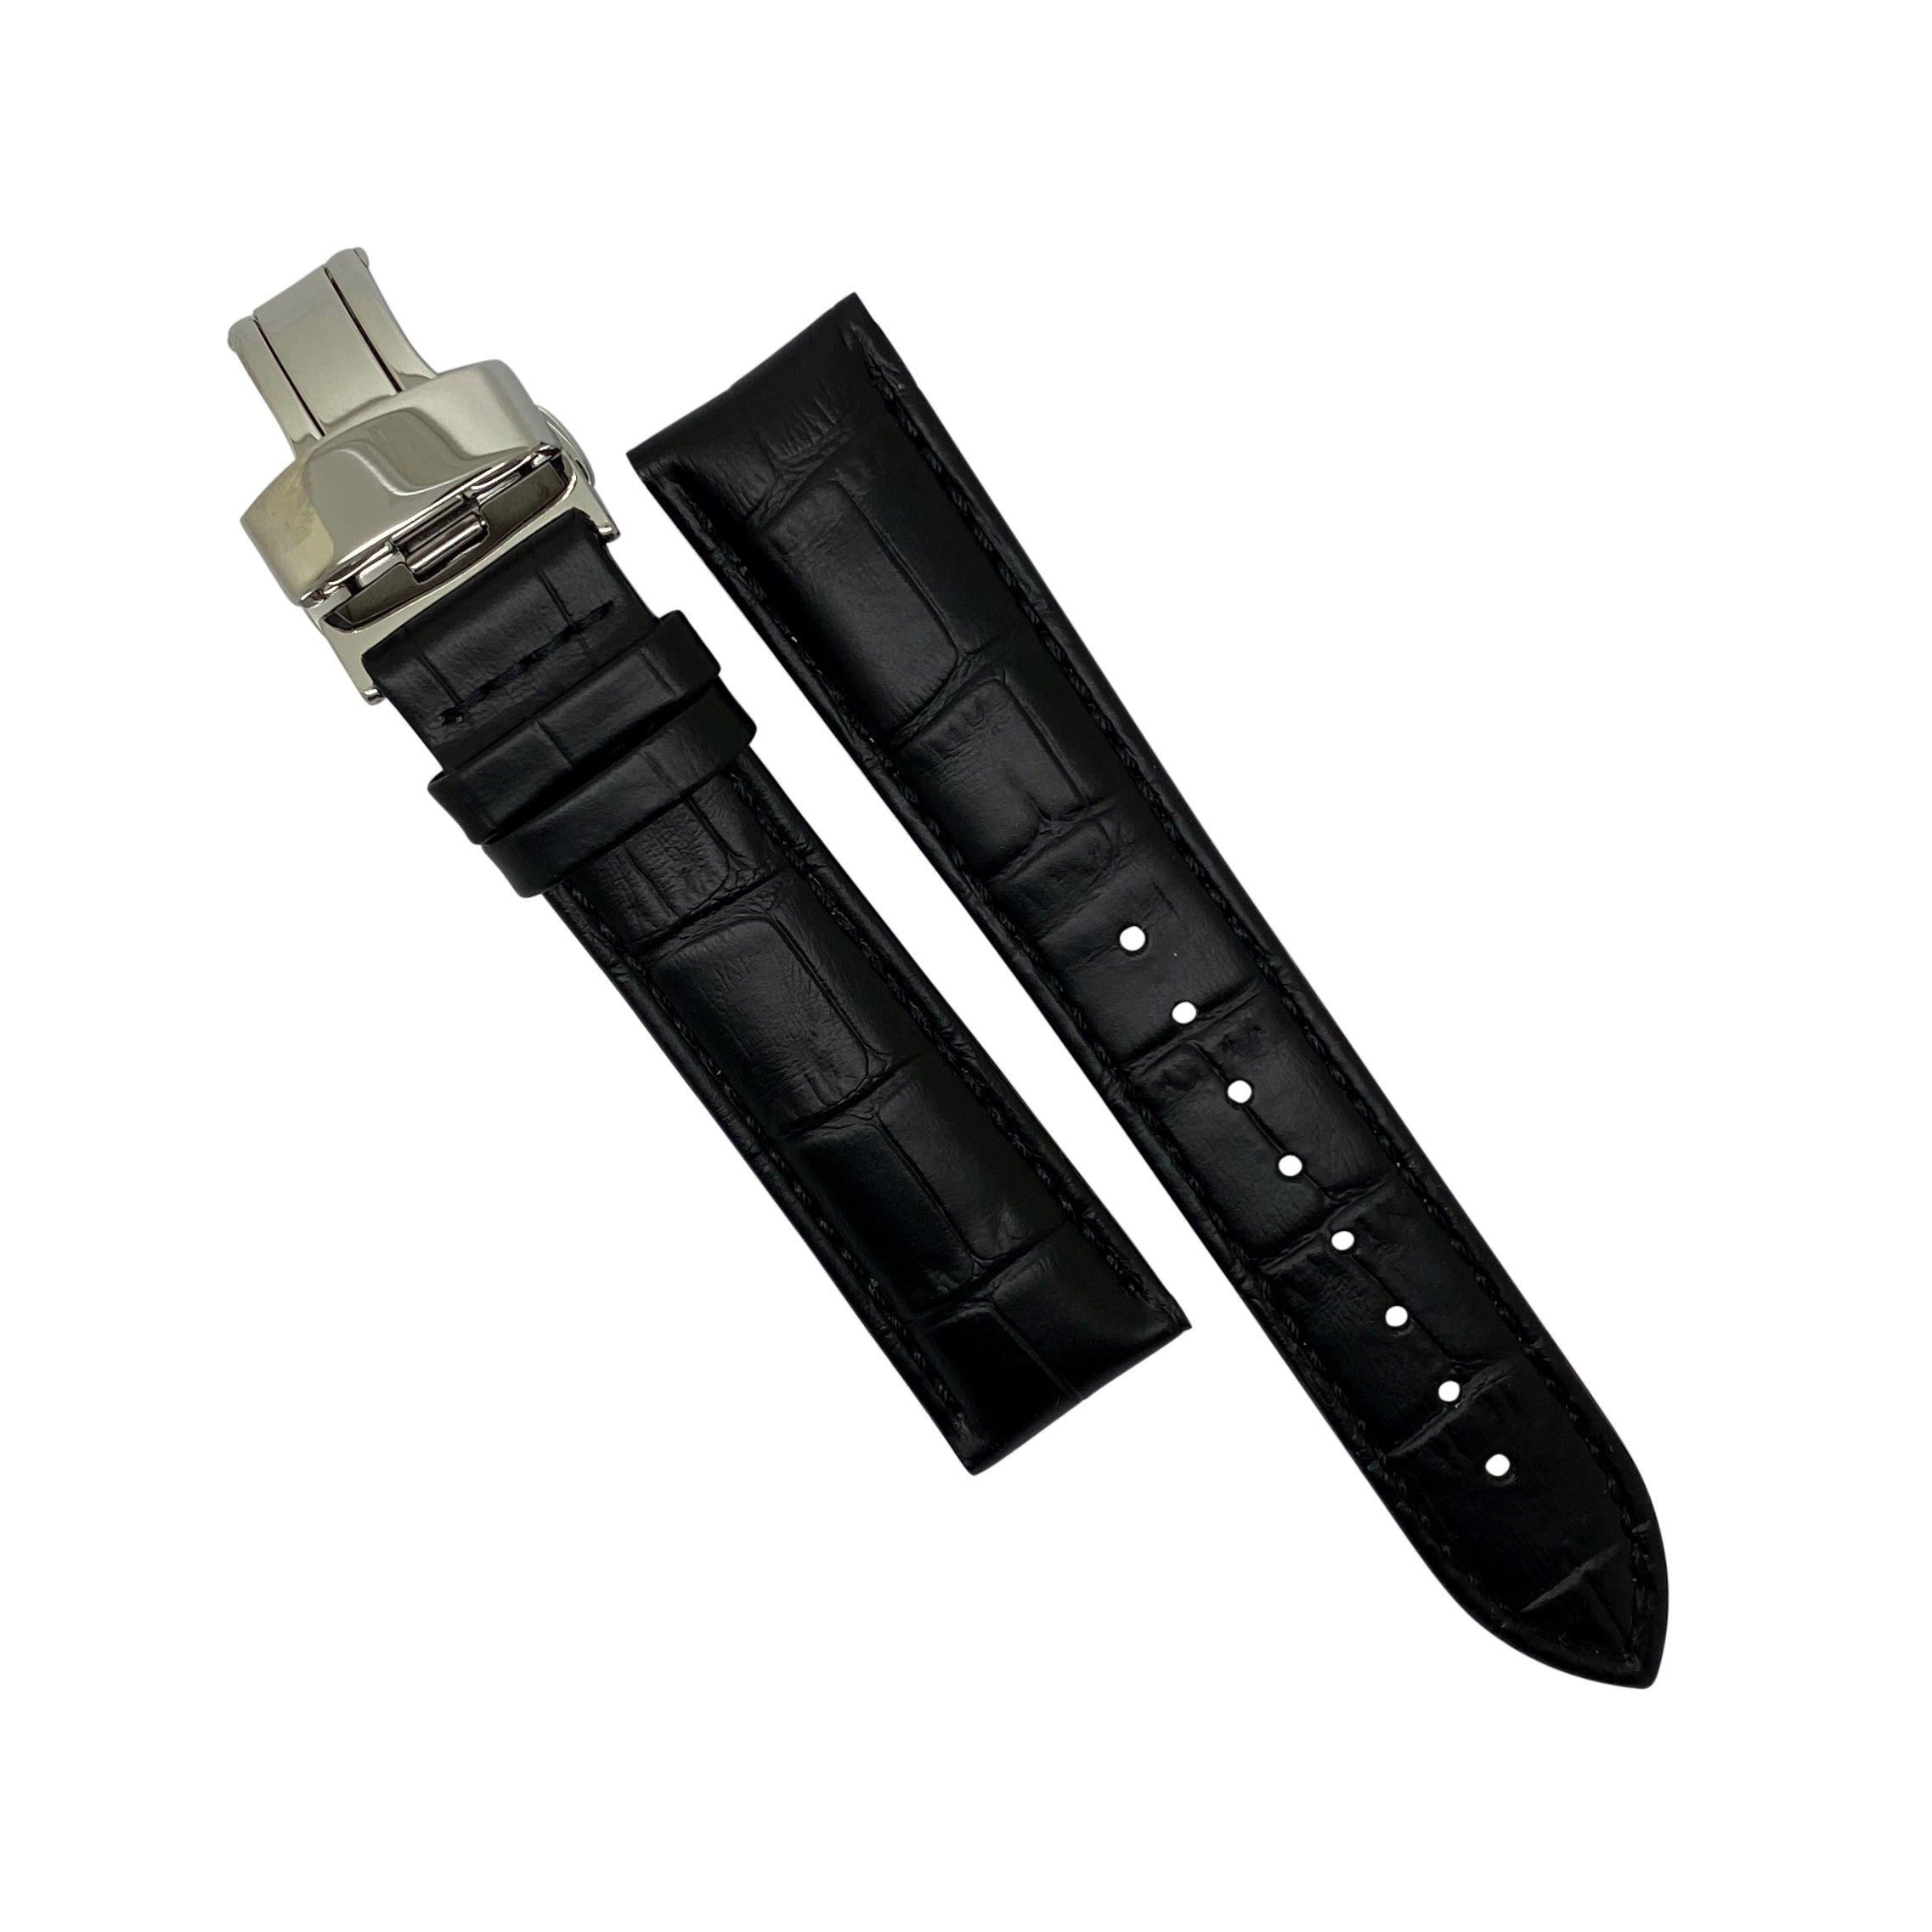 Genuine Croc Pattern Leather Watch Strap in Black w/ Butterfly Clasp (18mm) - Nomad Watch Works Malaysia